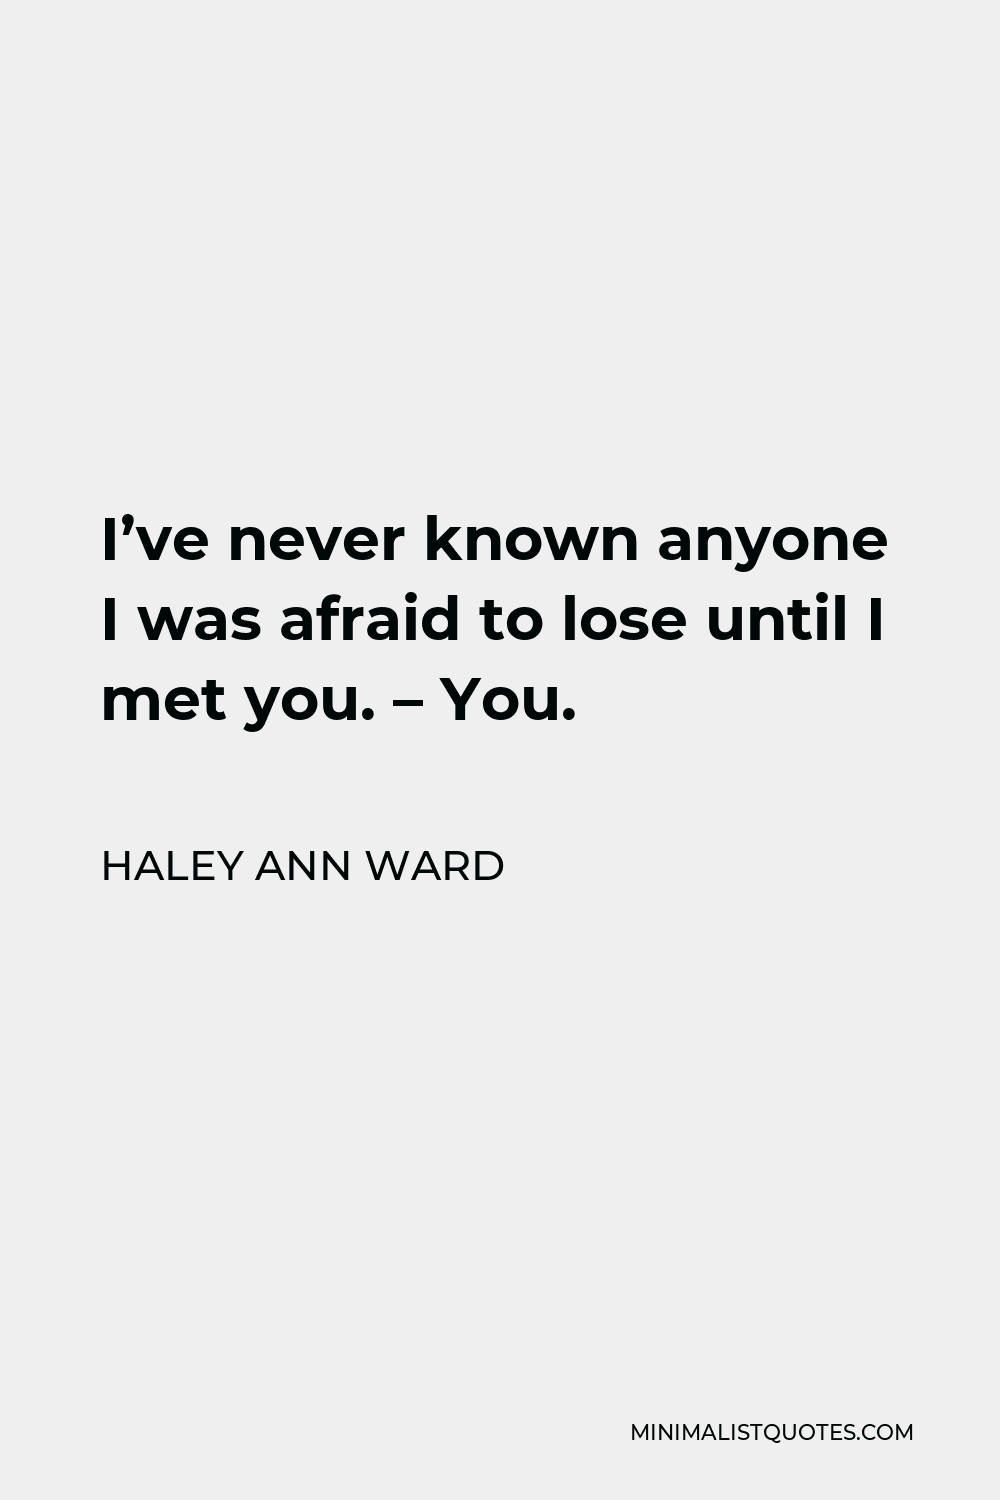 Haley Ann Ward Quote - I’ve never known anyone I was afraid to lose until I met you. – You.